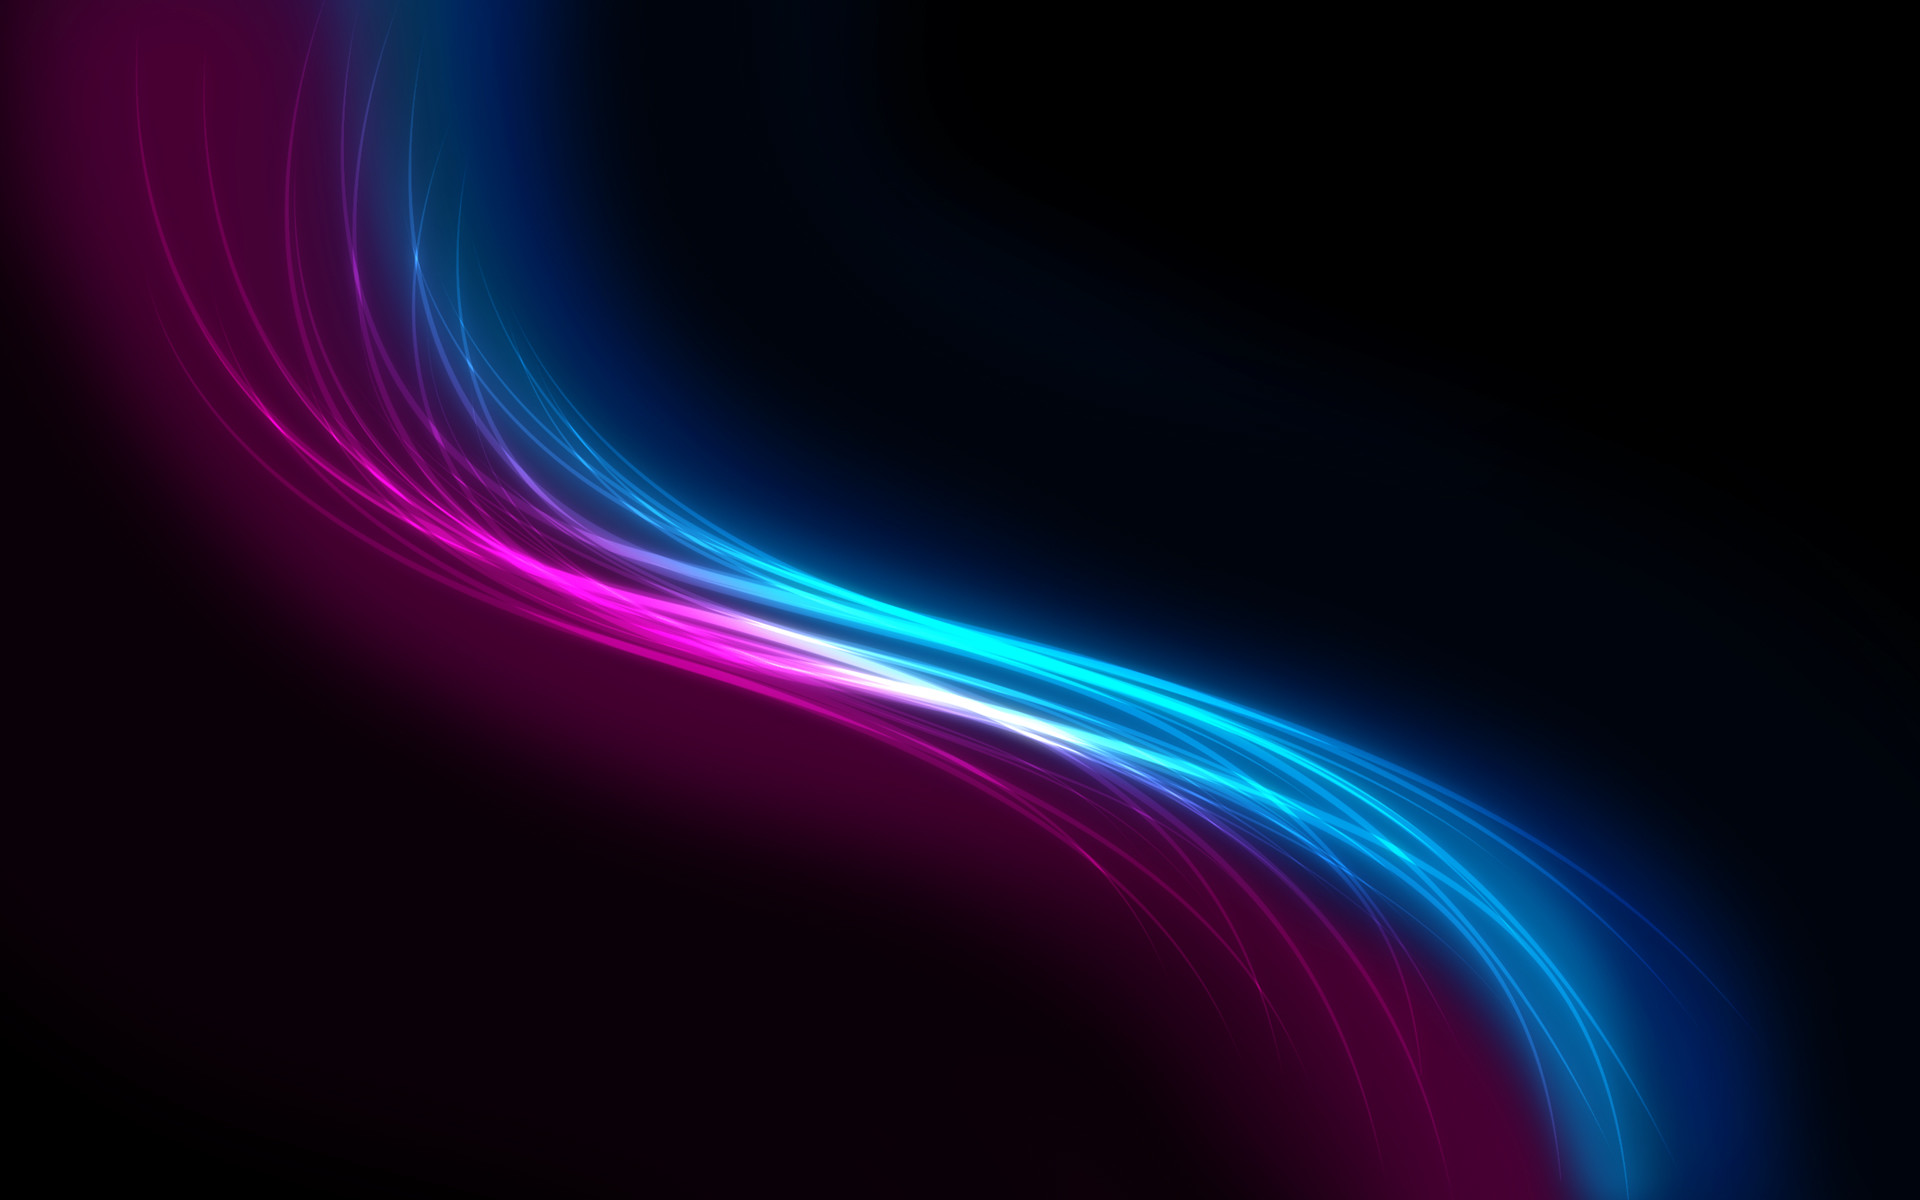 1920x1200 Abstract Designs | 13 Quality Abstract Backgrounds, Patterns For WebDesign